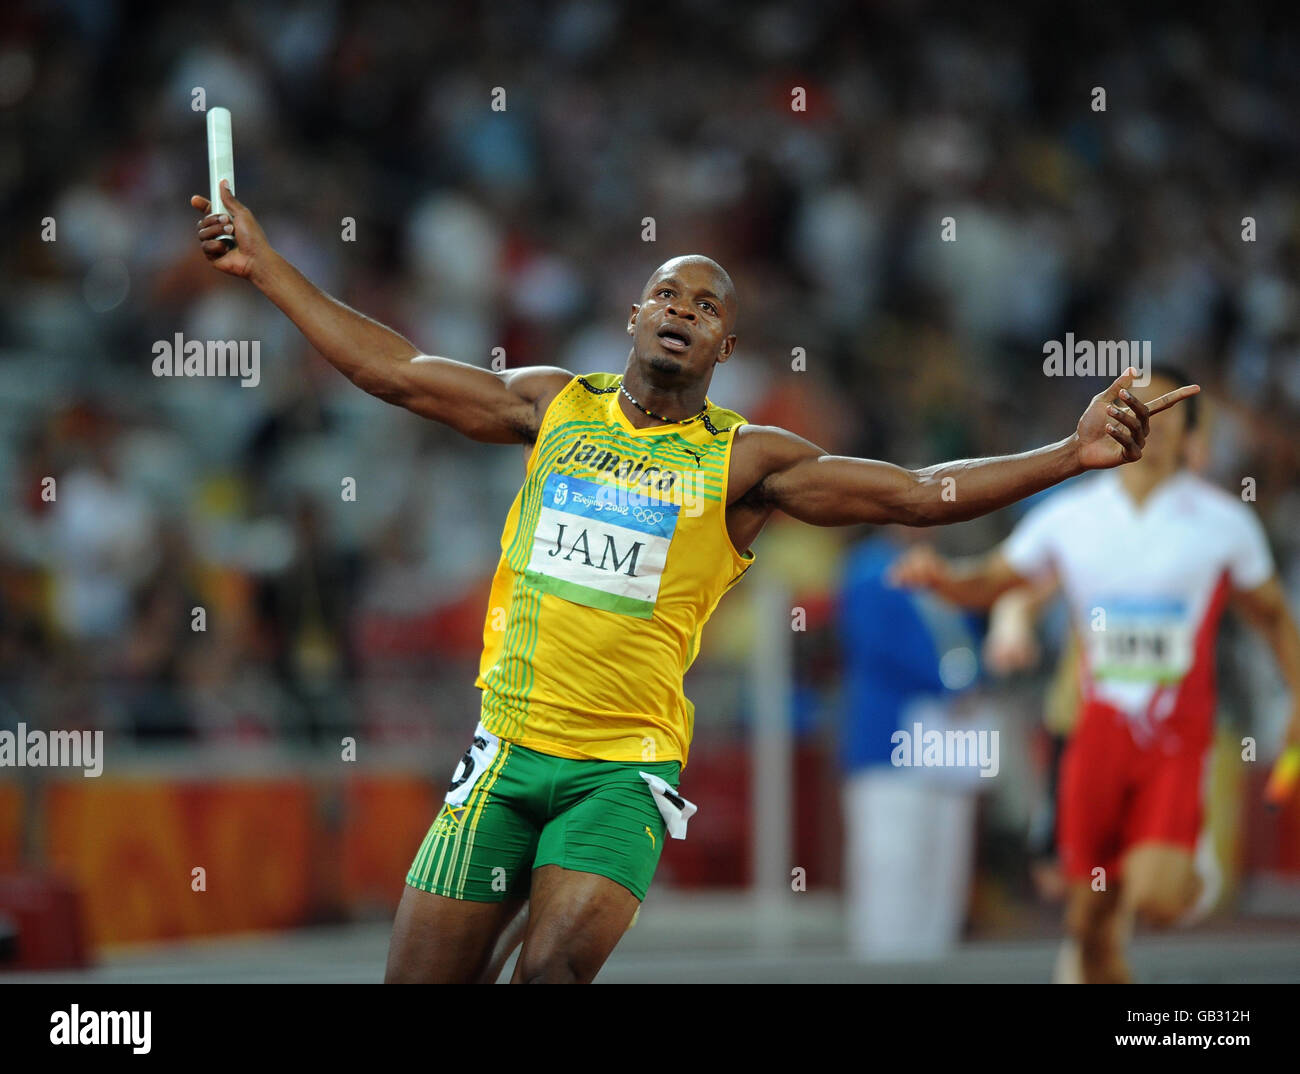 Jamaica's Asafa Powell celebrates after Jamaica win the 4x100m relay in a new world record time at the National Stadium in Beijing during the 2008 Beijing Olympic Games in China. Stock Photo